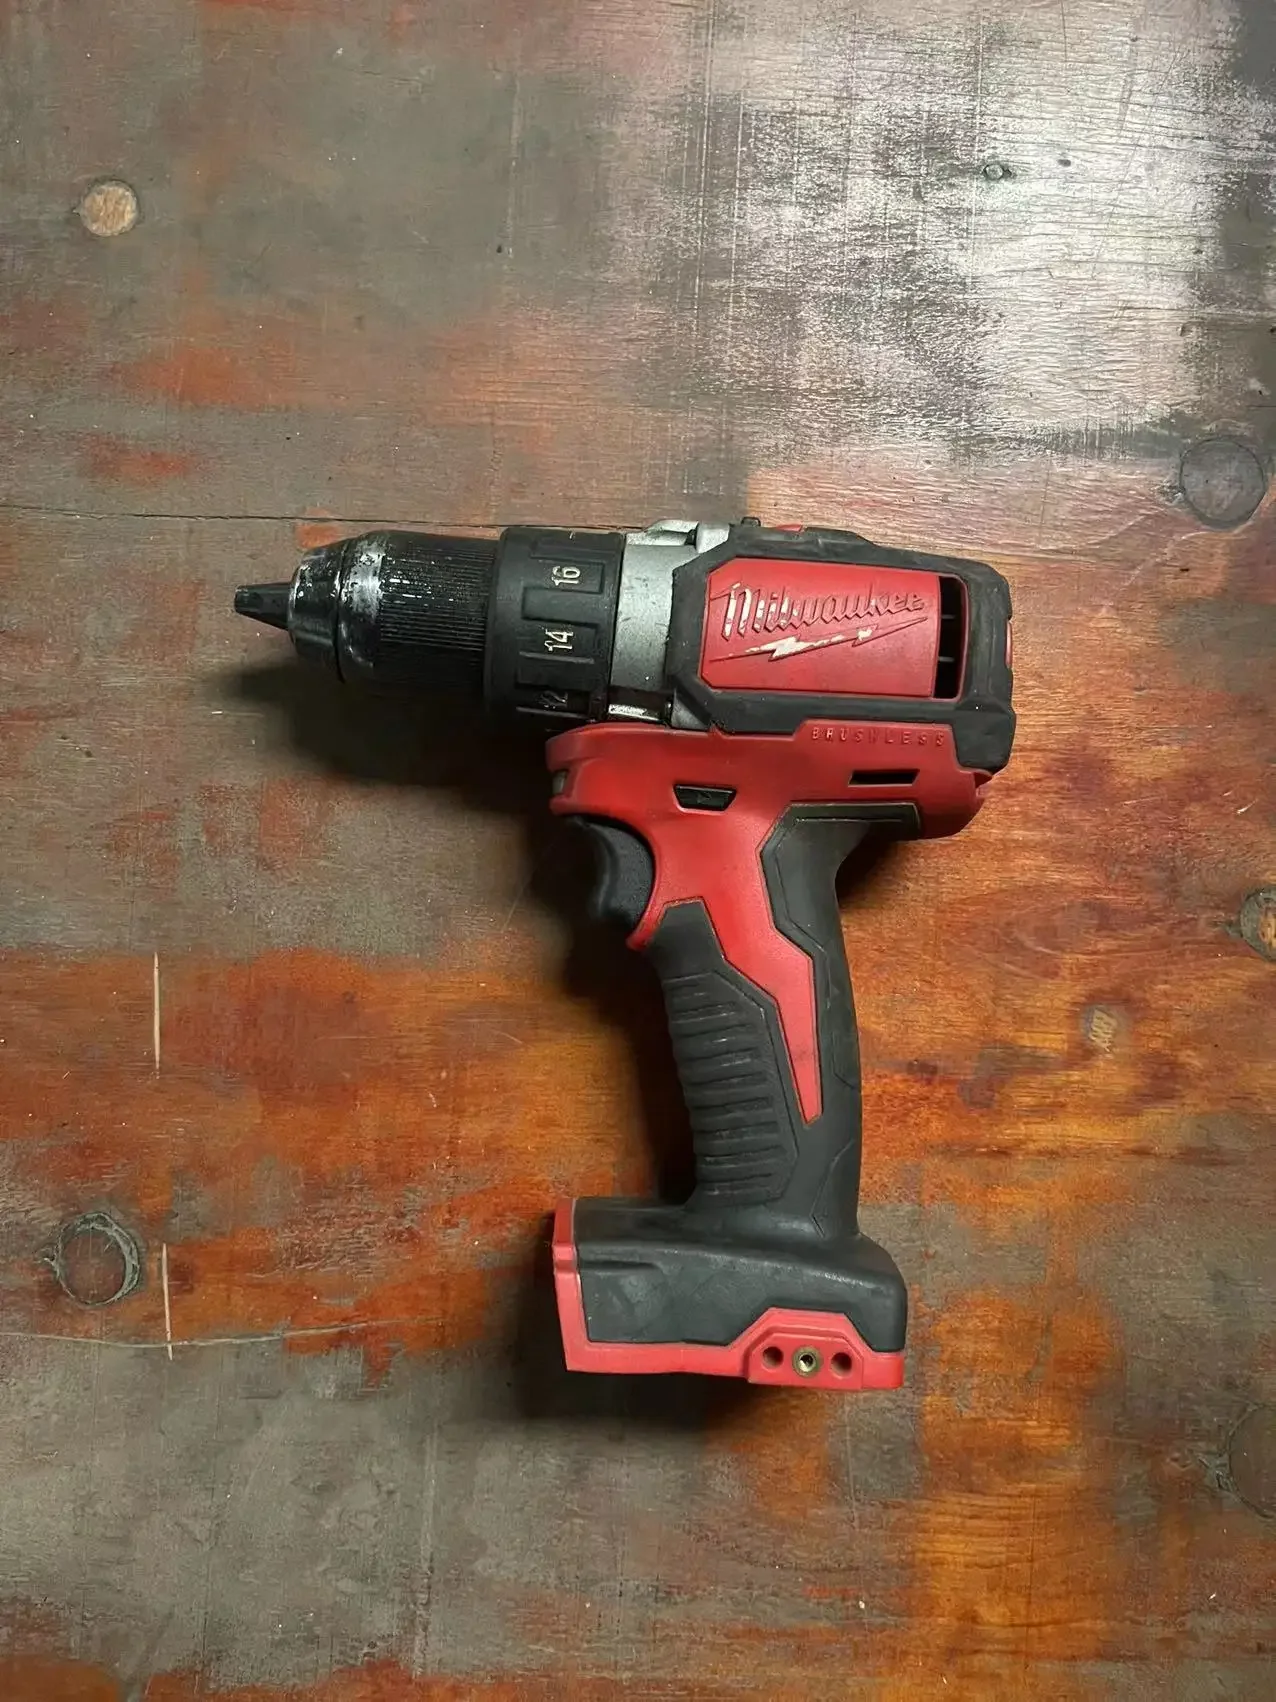 

Milwaukee 2701-20 M18 18-Volt Brushless 1/2" Drill/Driver,TOOL ONLY ,SECOND HAND